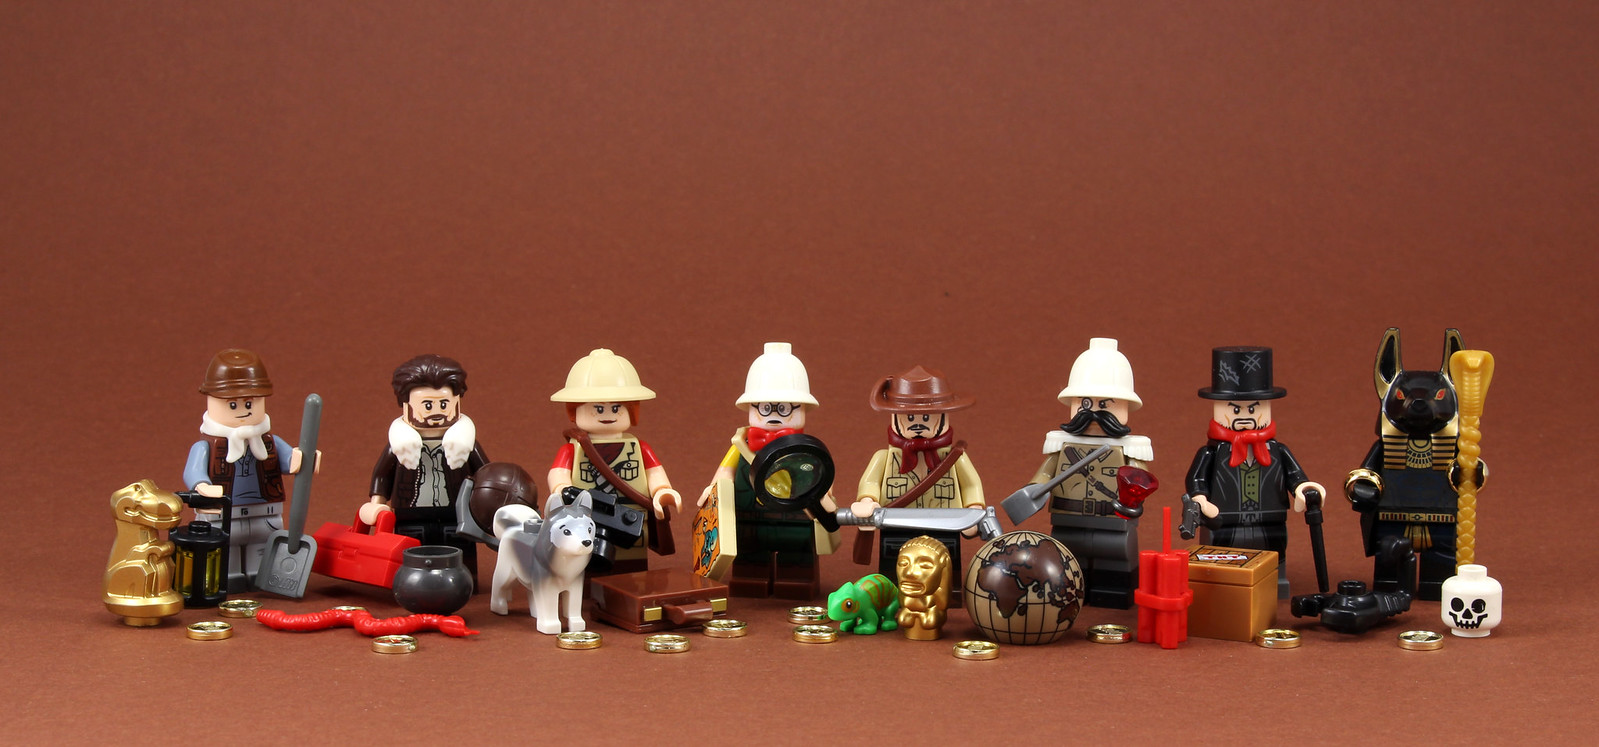 LEGO Adventurers redux, From the left: Mike, Harry Cane, Pi…